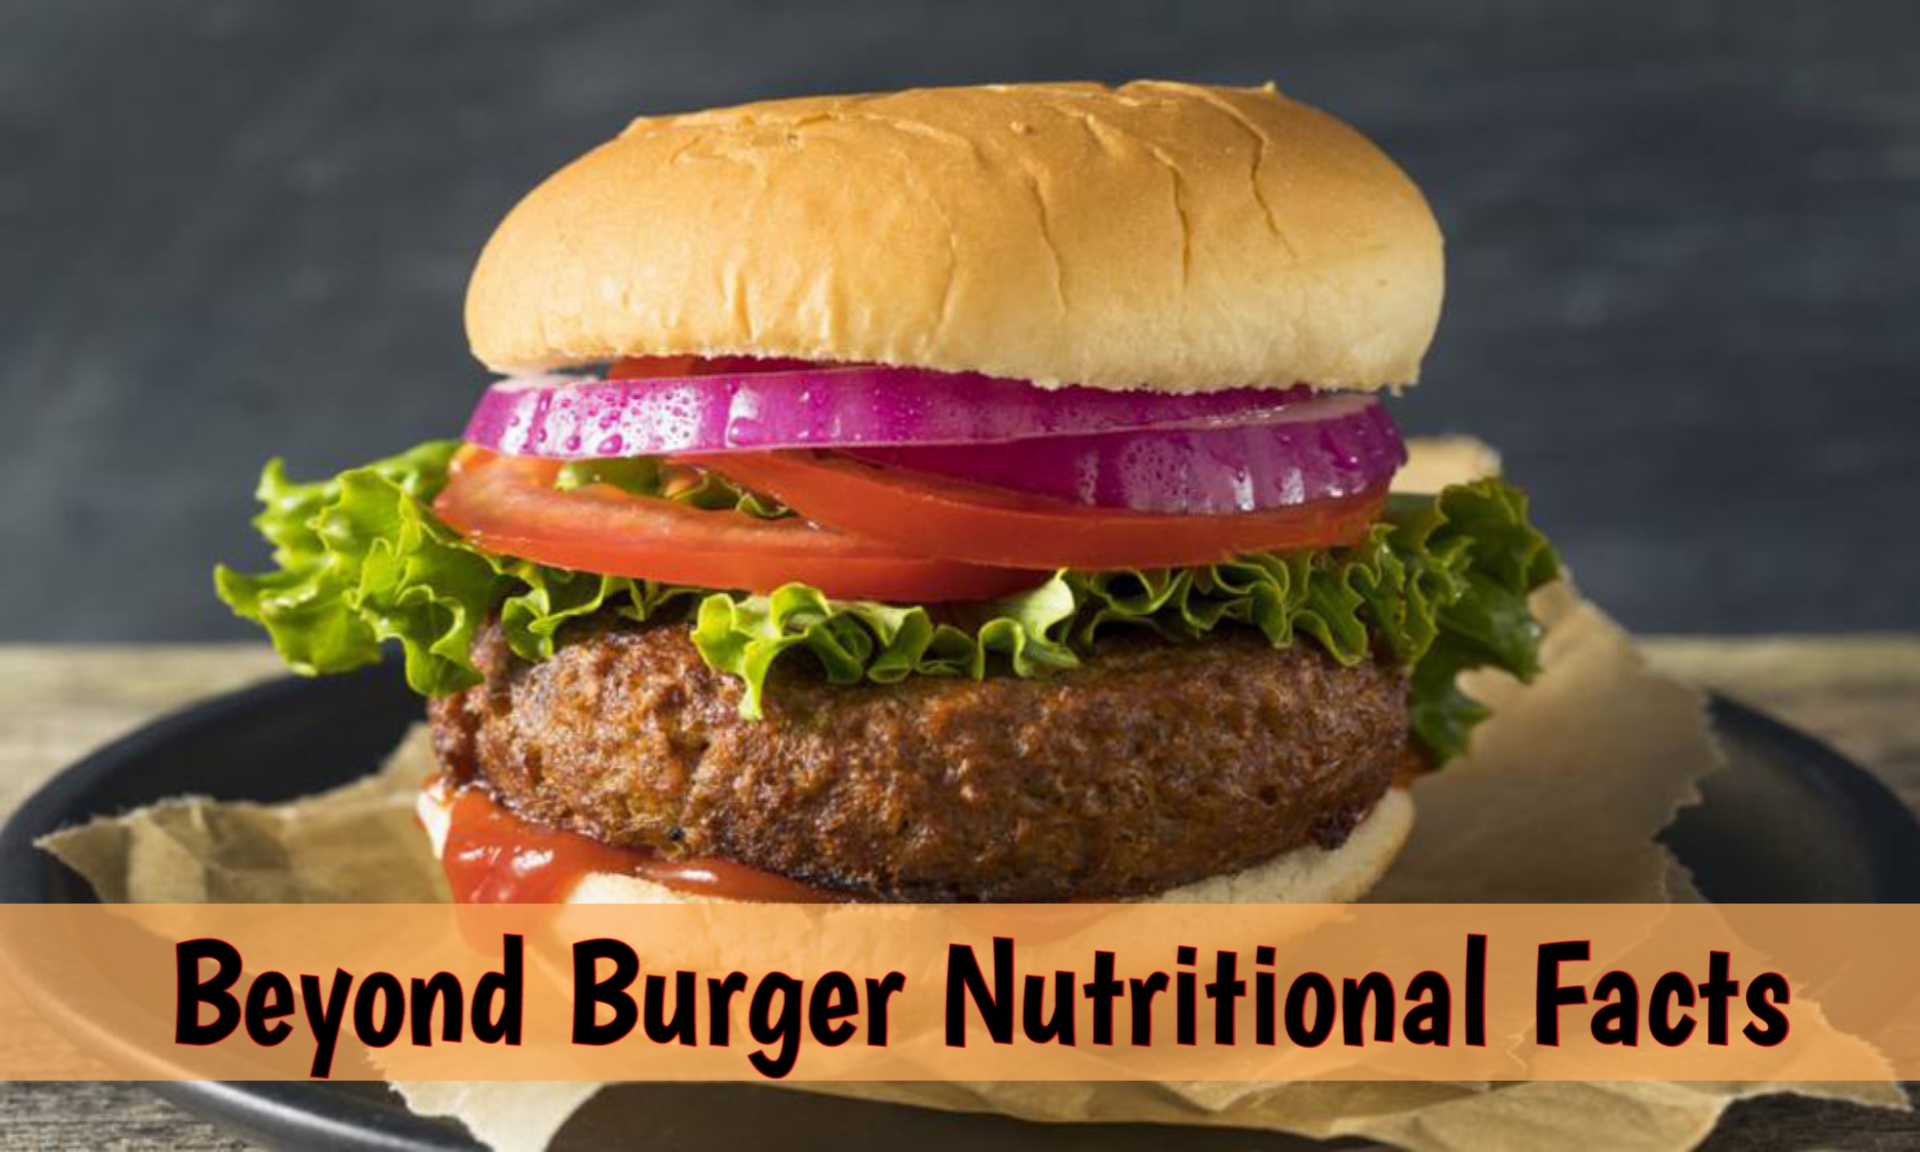 Beyond Burger Nutritional Facts